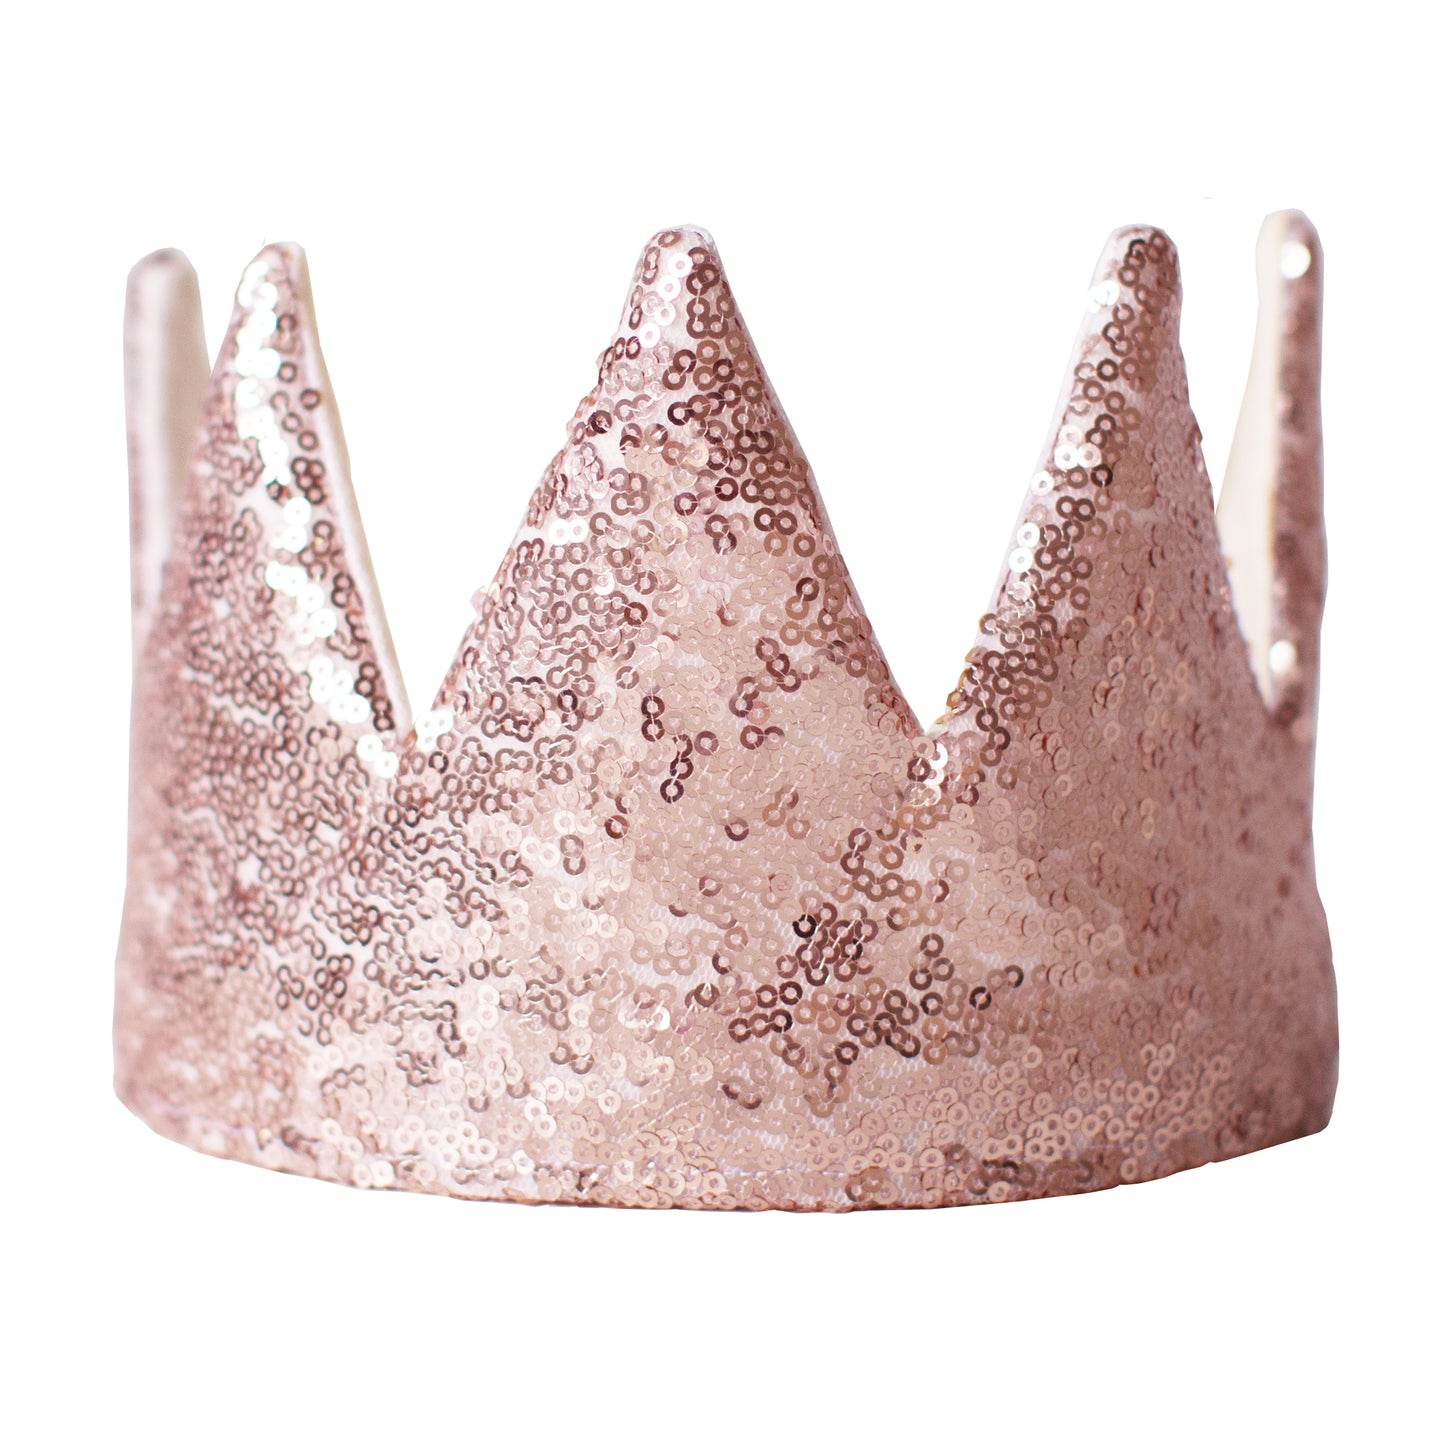 Children's Rose Gold Sequin Crown with unbleached cotton backing and cotton tape ties, handmade in England for creative play.